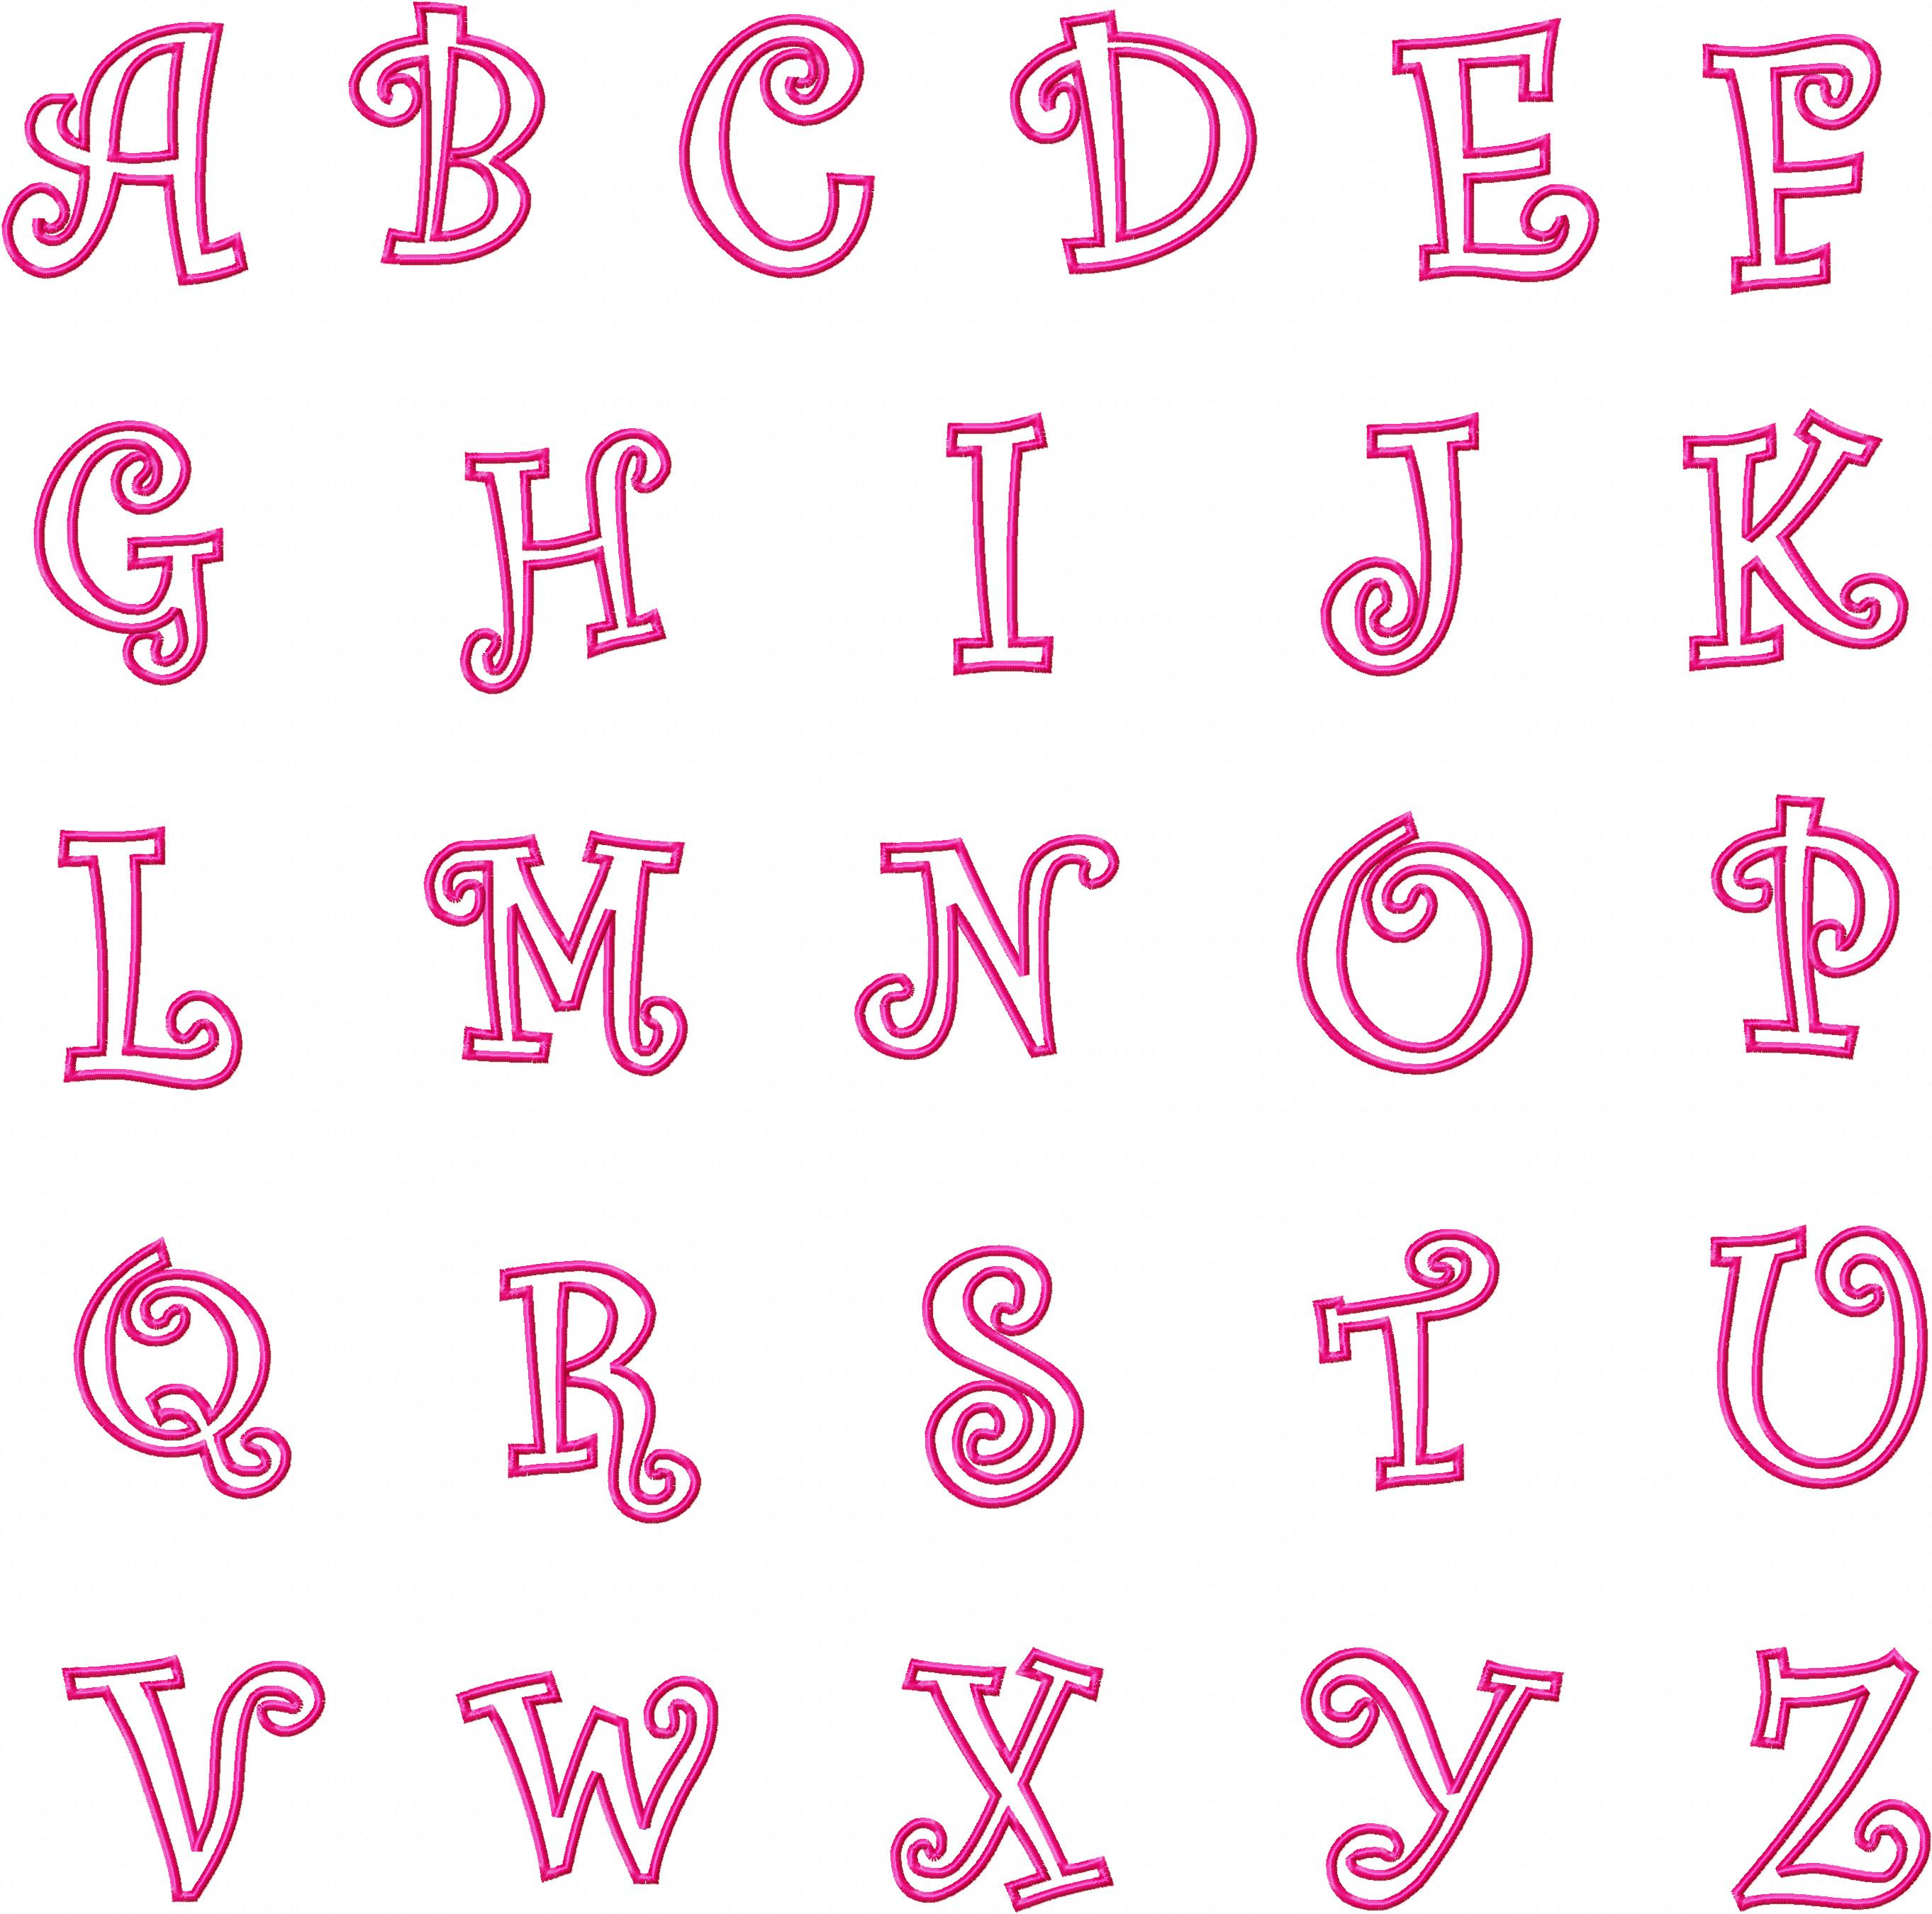 Embroidery Alphabet Patterns Free Embroidery Font Deal 50 Machine Embroidery Fonts